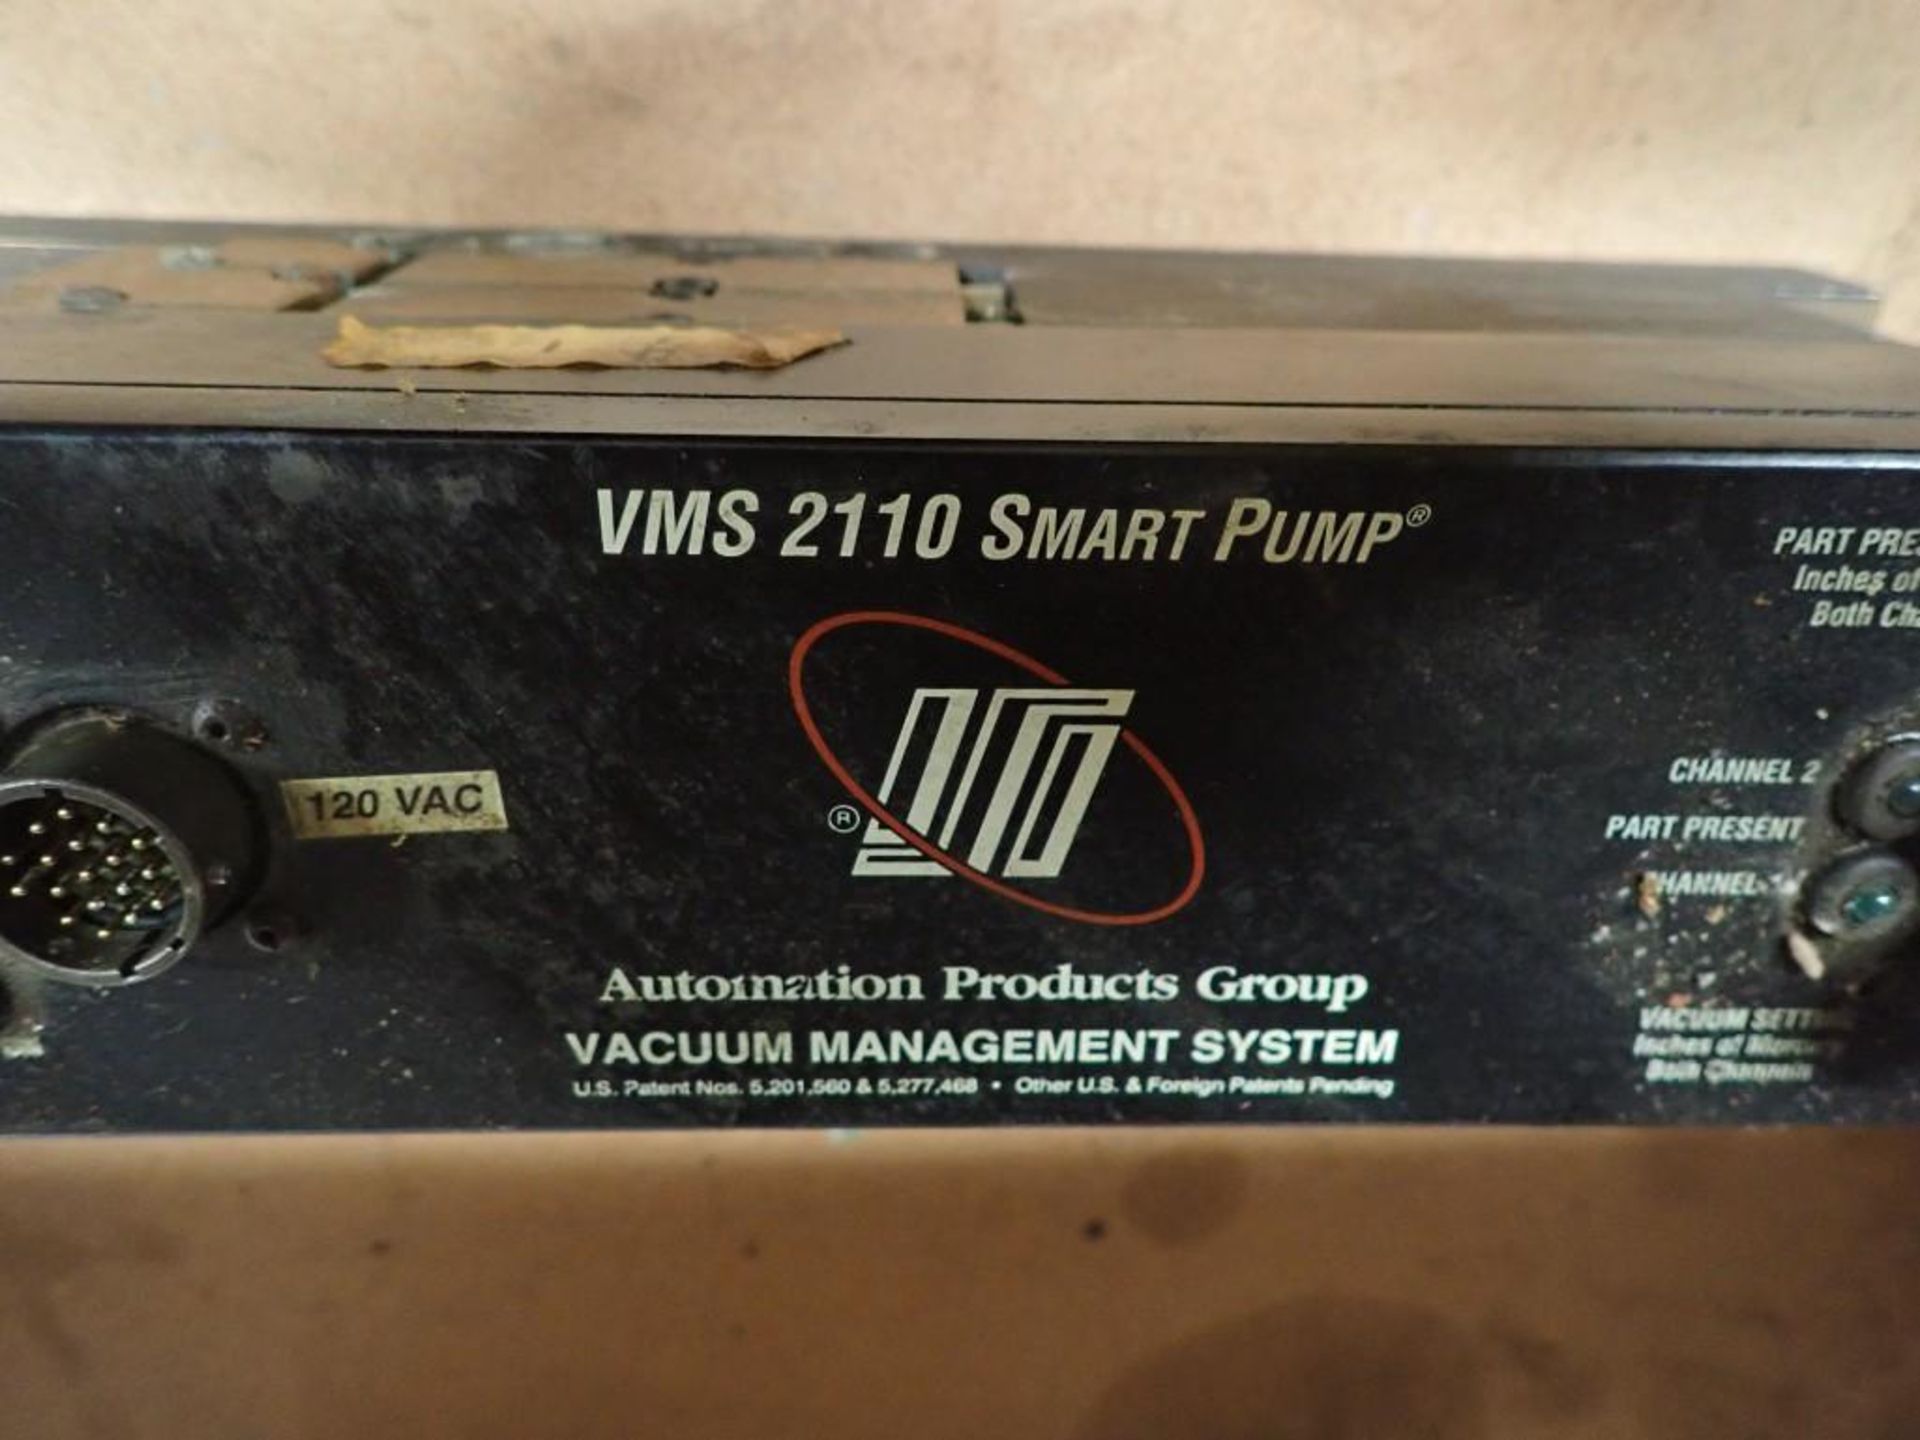 Automation Products Group #VMS 2110 Smart Pump - Image 5 of 5